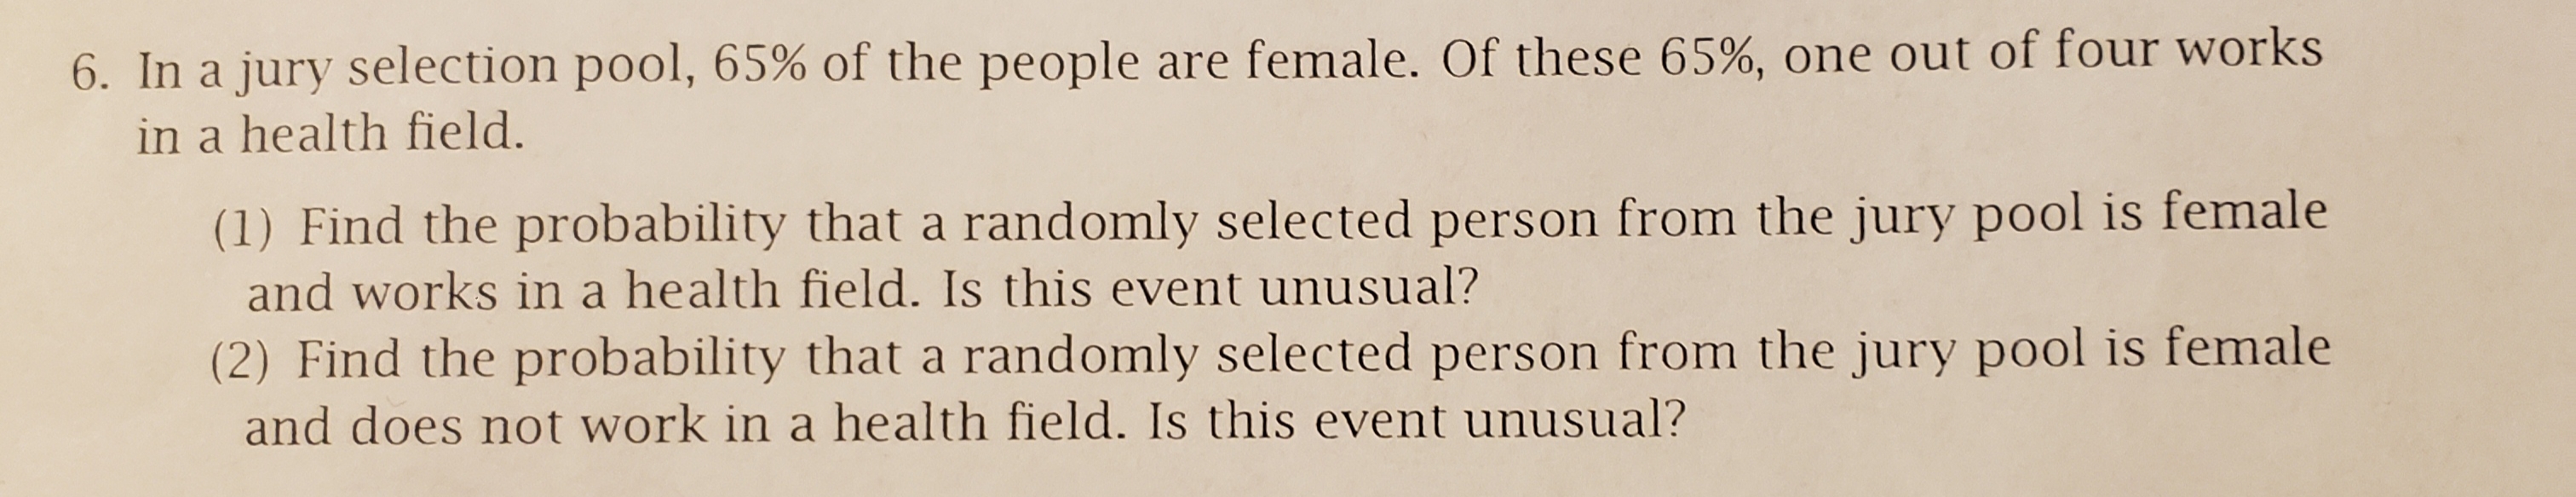 6. In a jury selection pool, 65% of the people are female. Of these 65%, one out of four works
in a health field.
(1) Find the probability that a randomly selected person from the jury pool is female
and works in a health field. Is this event unusual?
(2) Find the probability that a randomly selected person from the jury pool is female
and does not work in a health field. Is this event unusual?
